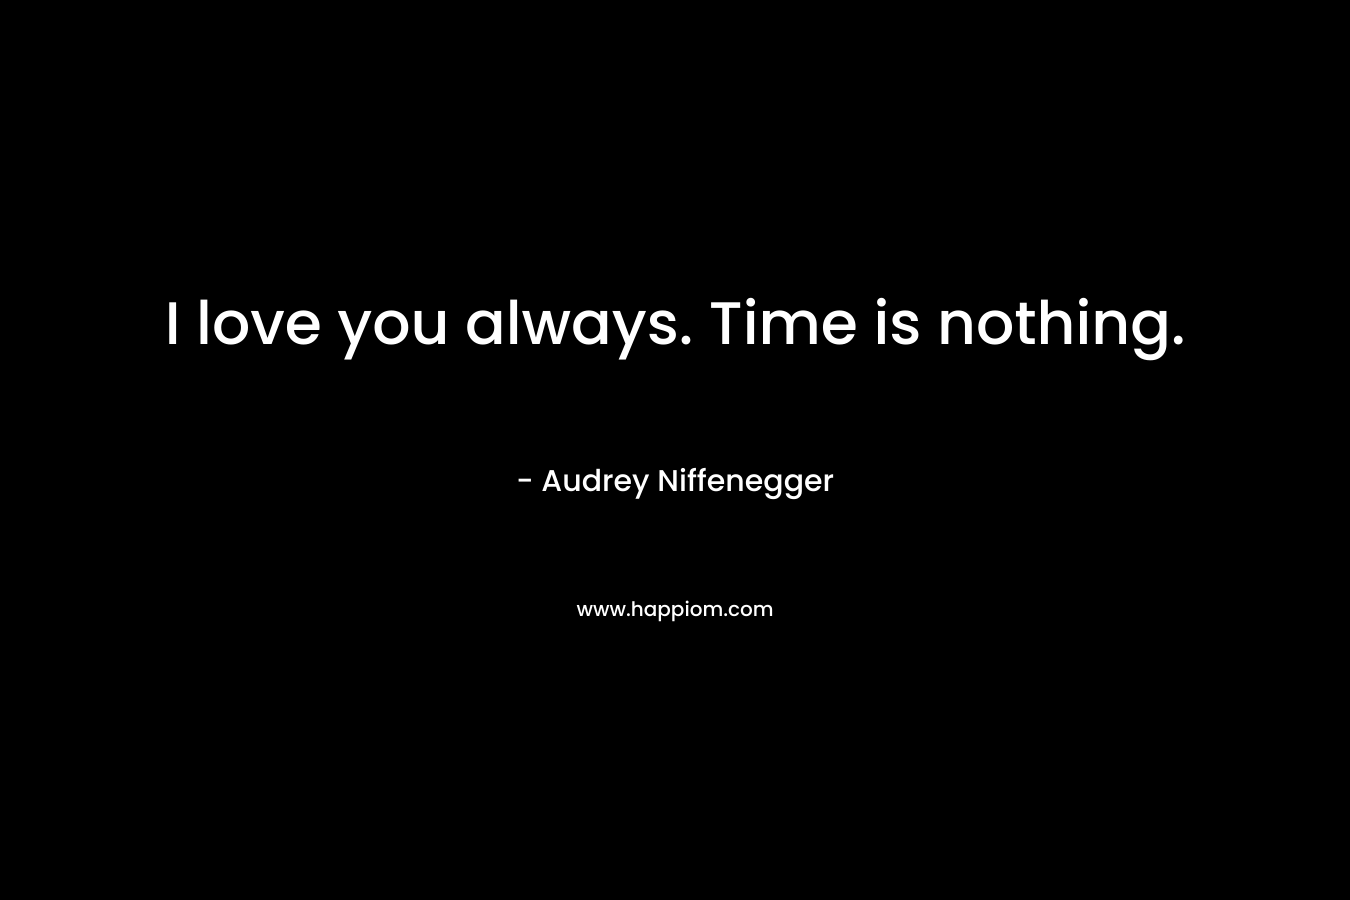 I love you always. Time is nothing.